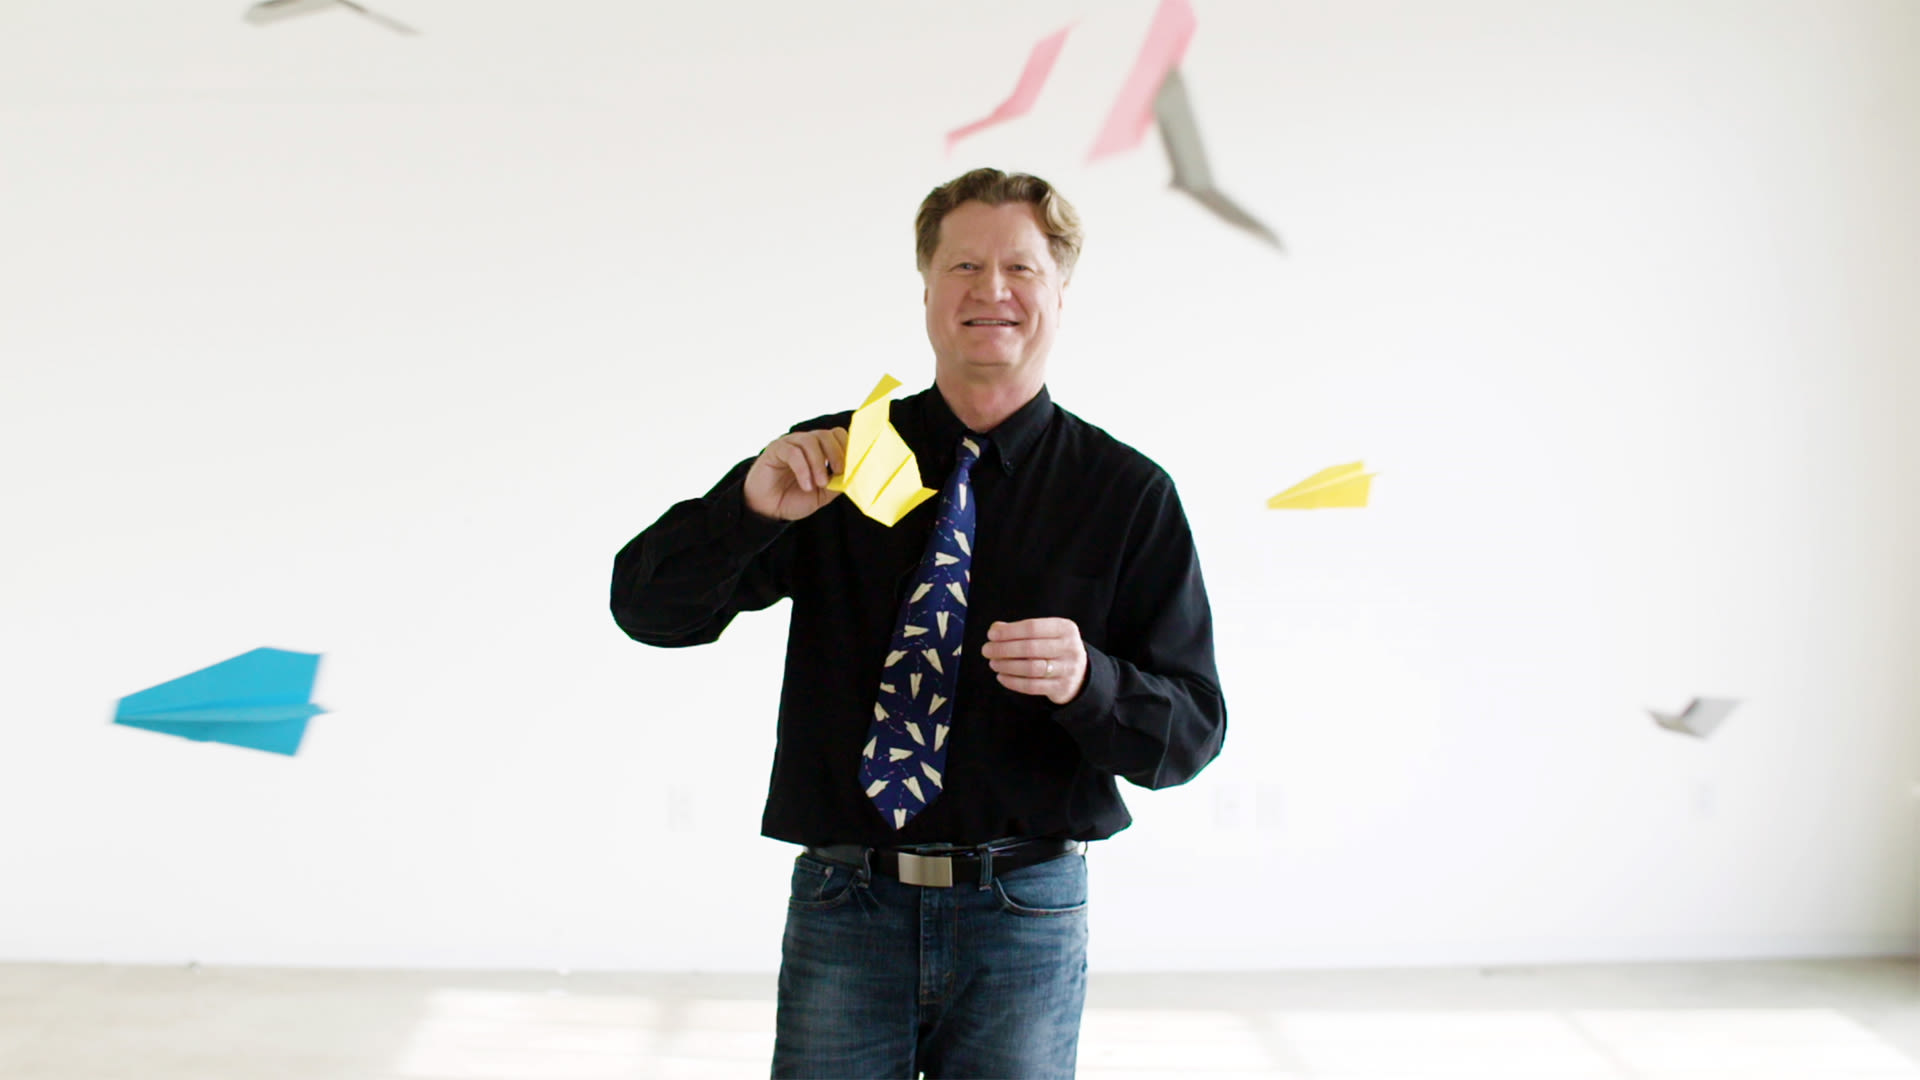 Watch How This Guy Folds And Flies World Record Paper Airplanes Obsessed Wired